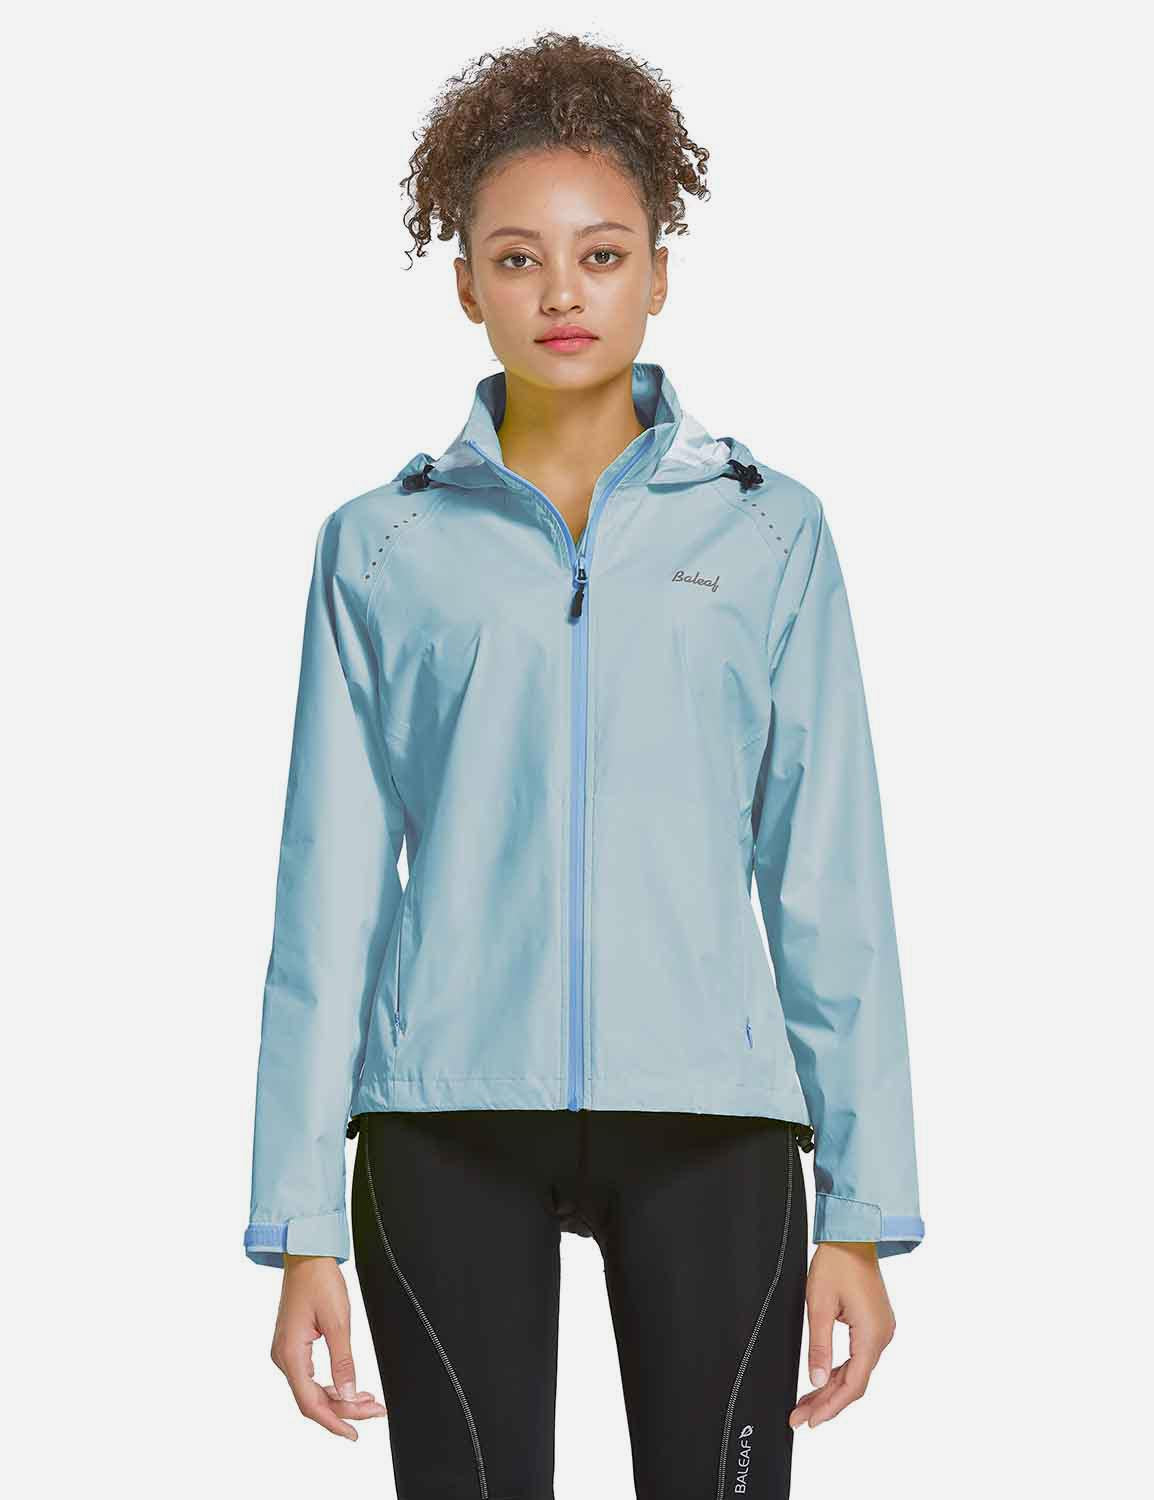 Baleaf Women's Waterproof Lightweight Full-Zip Pocketed Cycling Jacket aaa468 Ethereal Blue Front